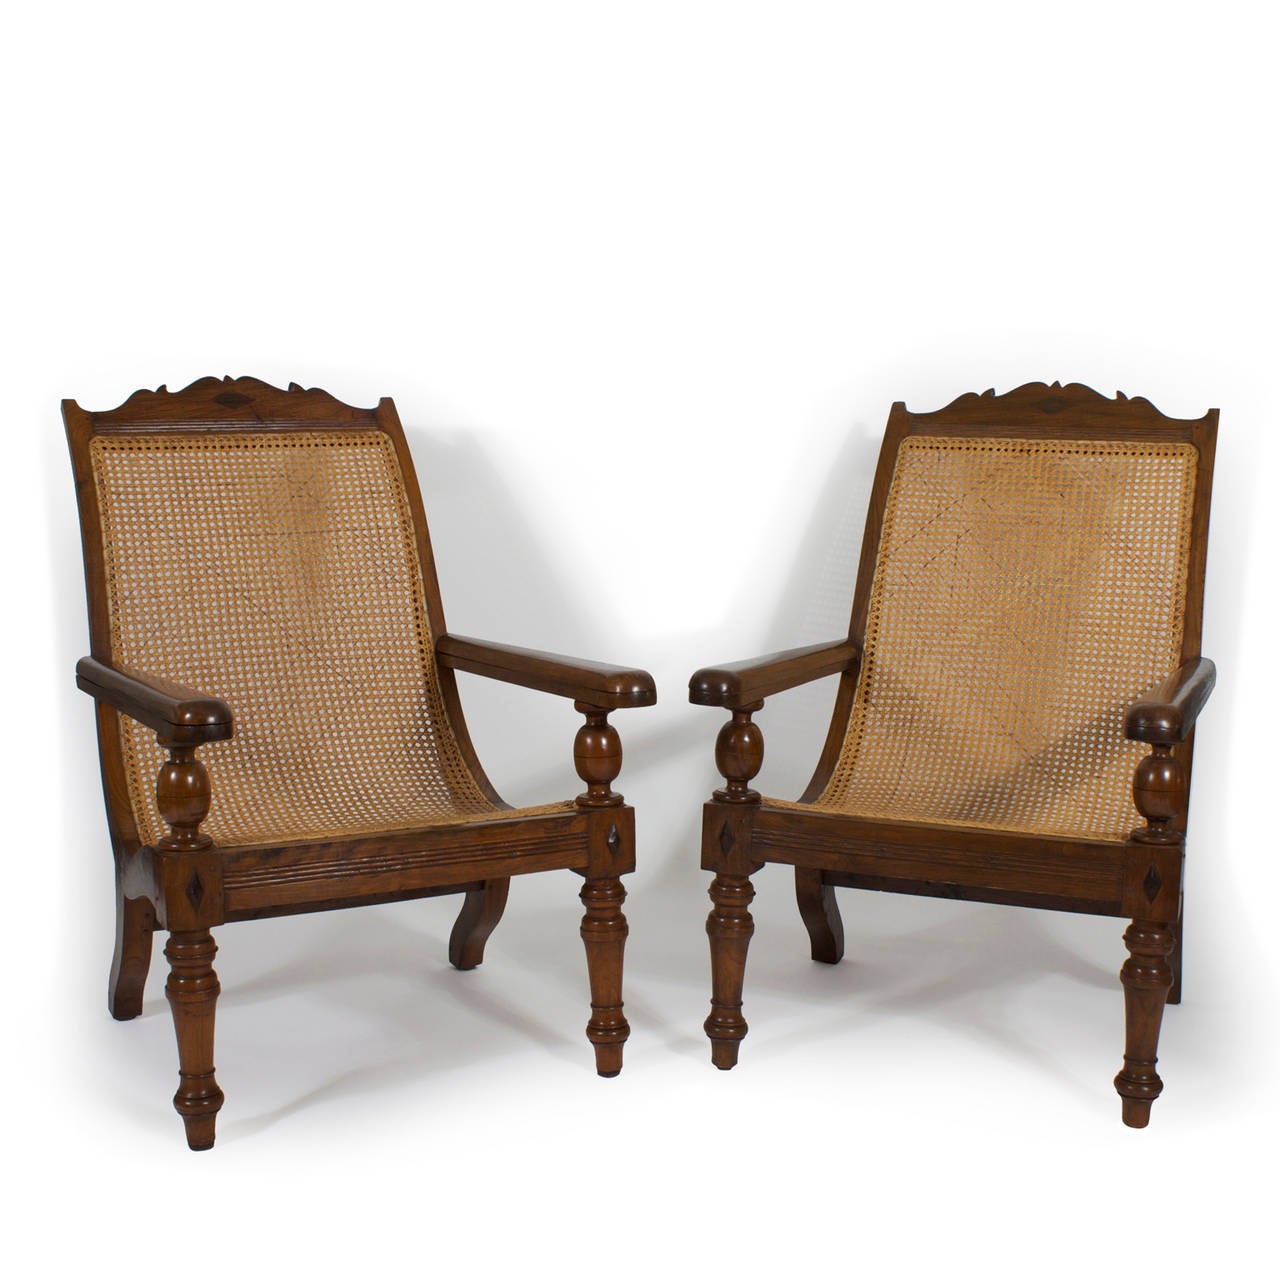 A fine pair of late 19th century or early 20th century planters chairs, in tropical hardwood with caned seats and backs, reeded and applied diamond decoration and great turnings with, of course, the prerequisite extending arms to use leg rests, for